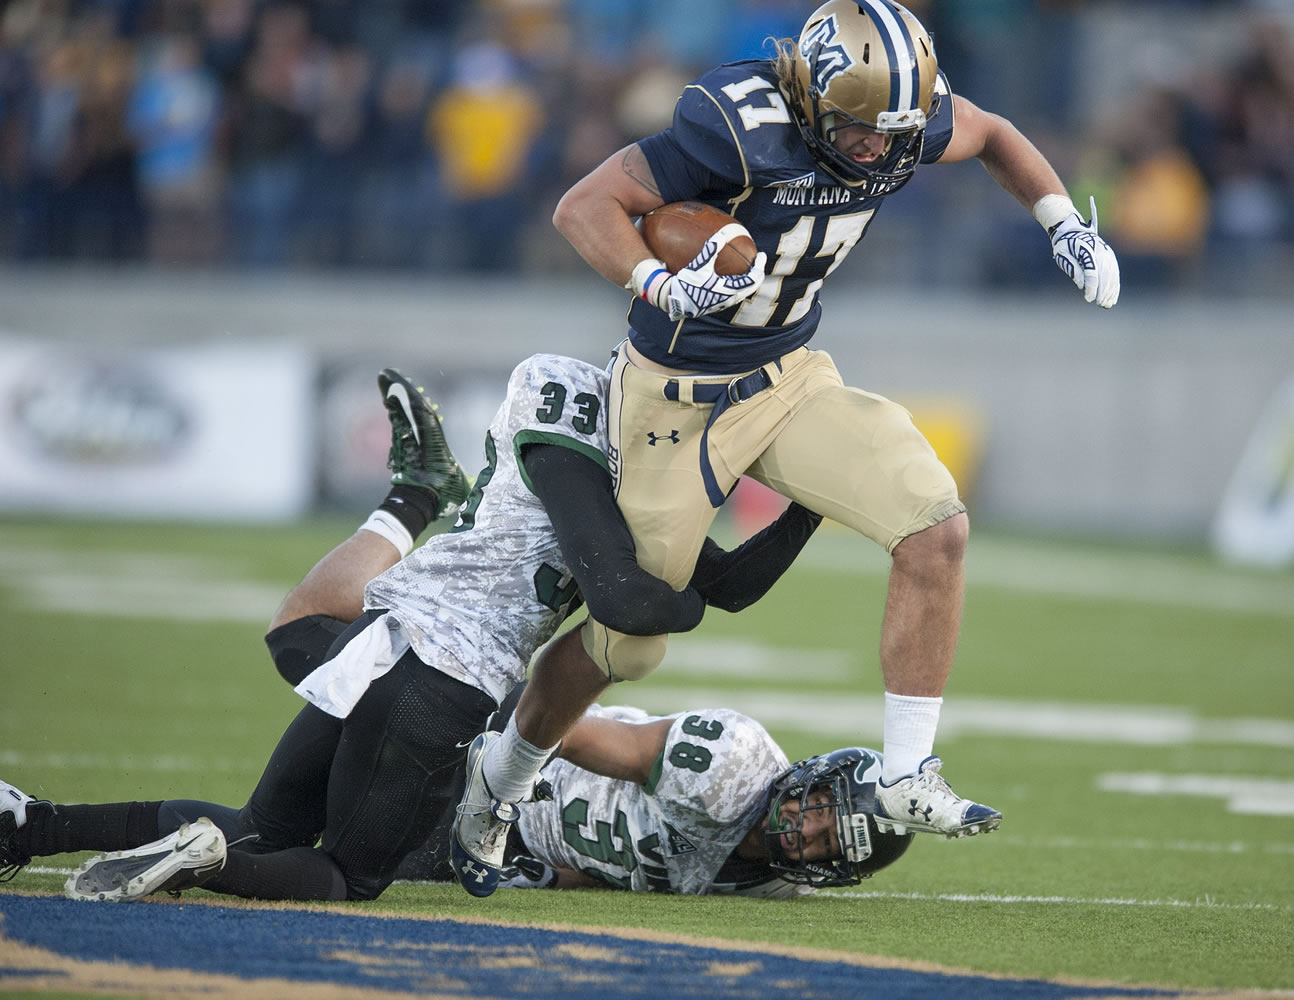 Montana State running back Chad Newell (17) hurdles a Portland State defender during the second half Saturday, Nov. 8, 2014 in Bozeman, Mont. Montana State won 29-22.